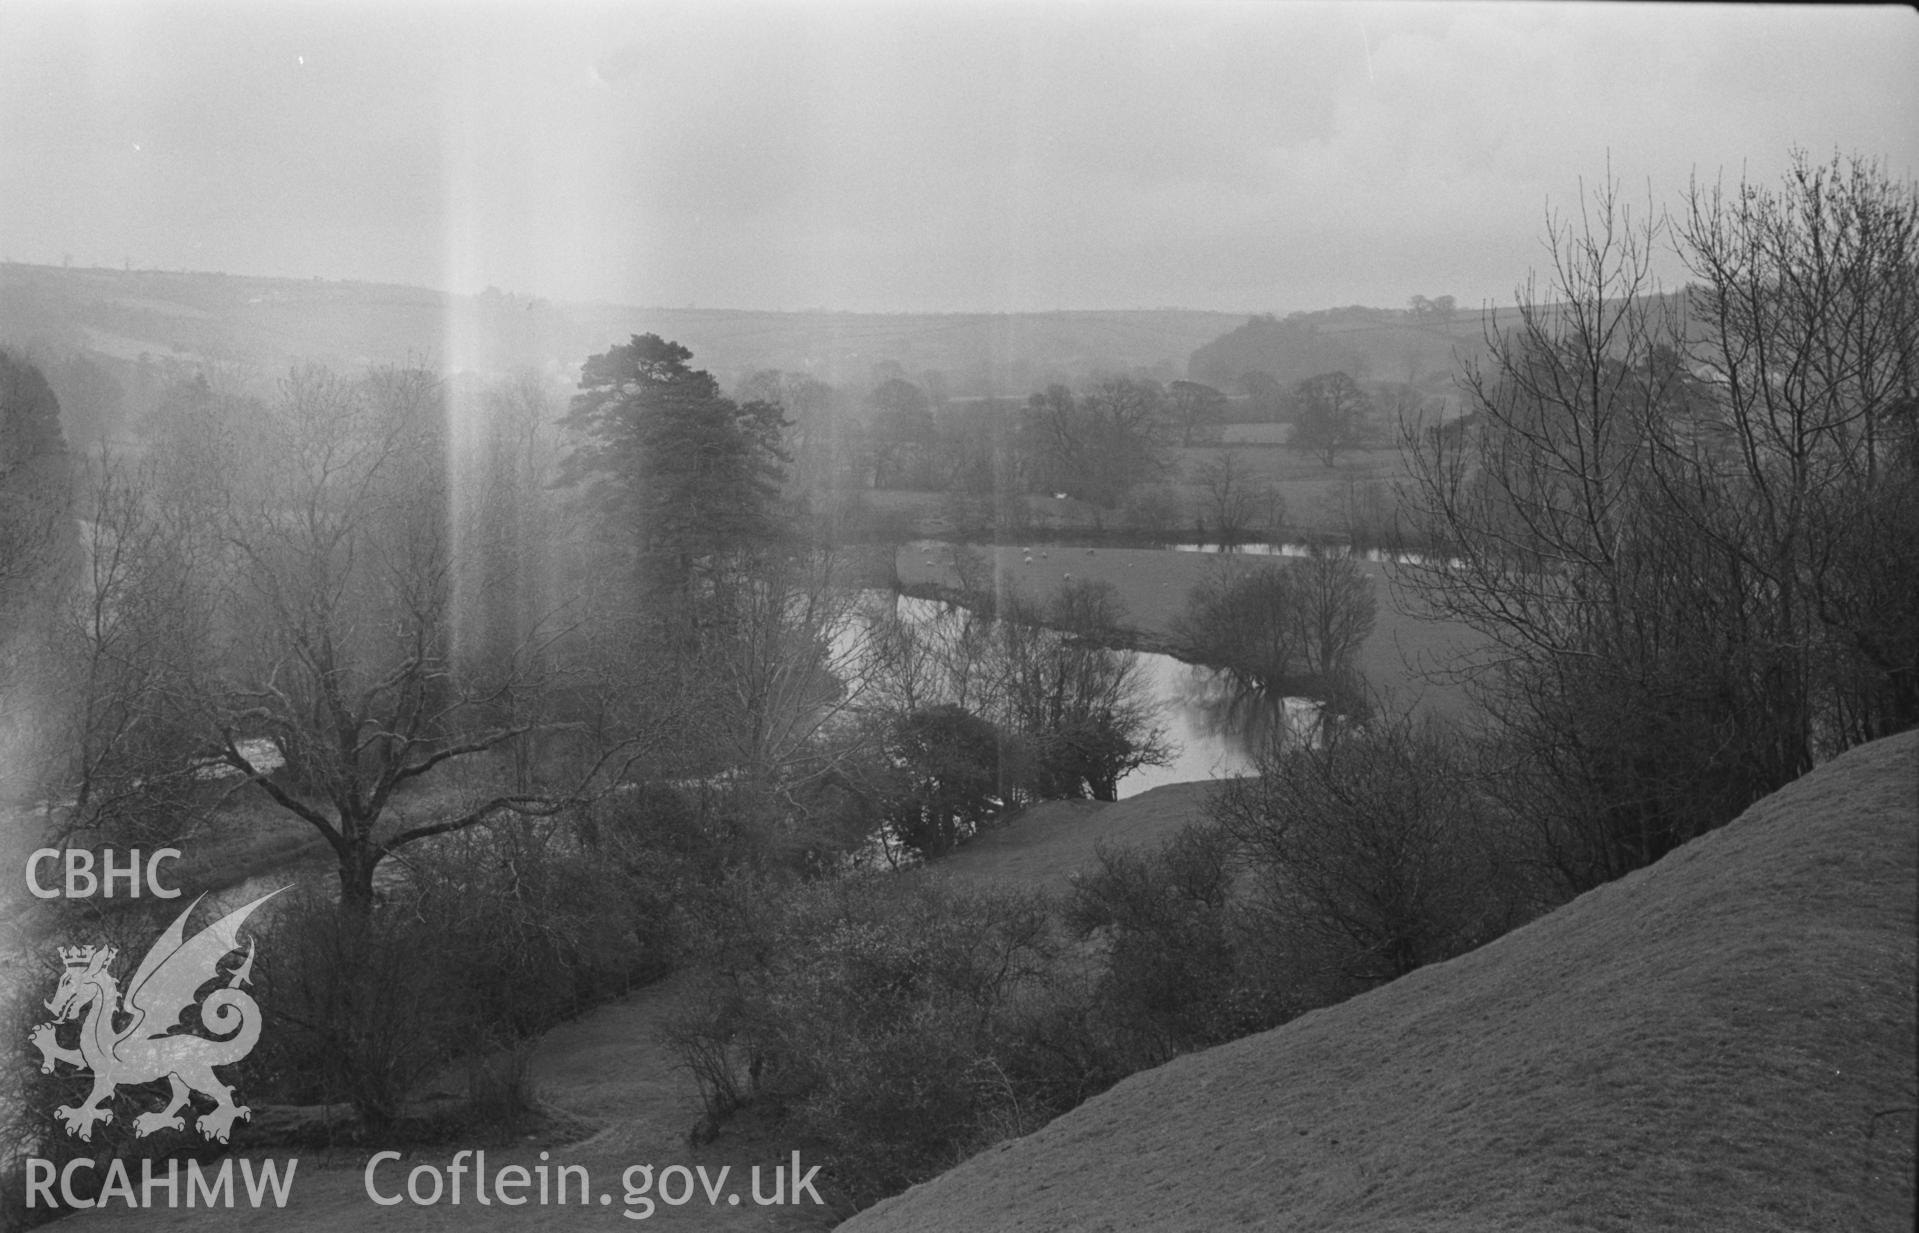 Black and White photograph showing views up the Teifi from the northern slope of the castle hill. Photographed by Arthur Chater in April 1962 from Grid Reference SN 312 408, looking east.